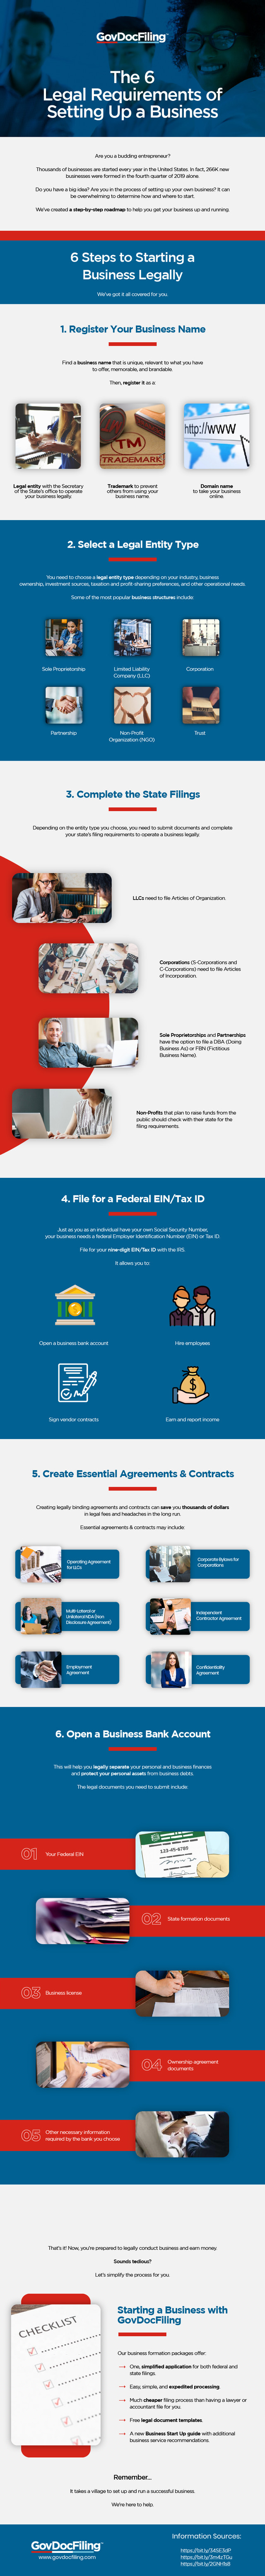 Govdoc-infographic-The-6-Legal-Requirements-of-Setting-Up-a-Business-infographic-1